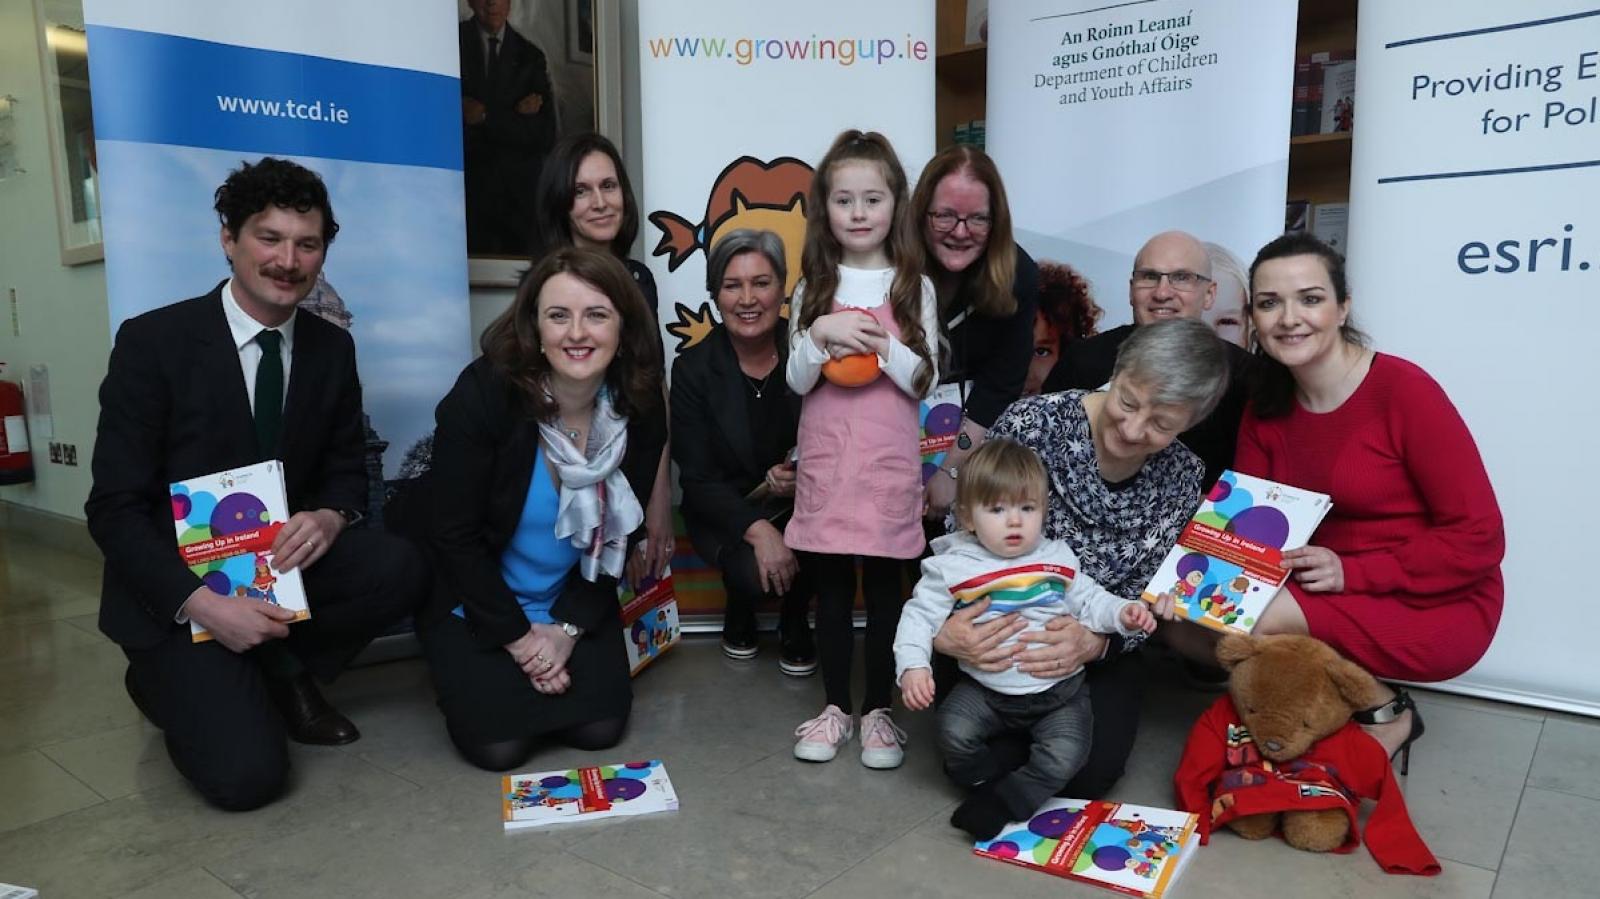 Launch of Growing Up in Ireland reports 21 Feb 2019